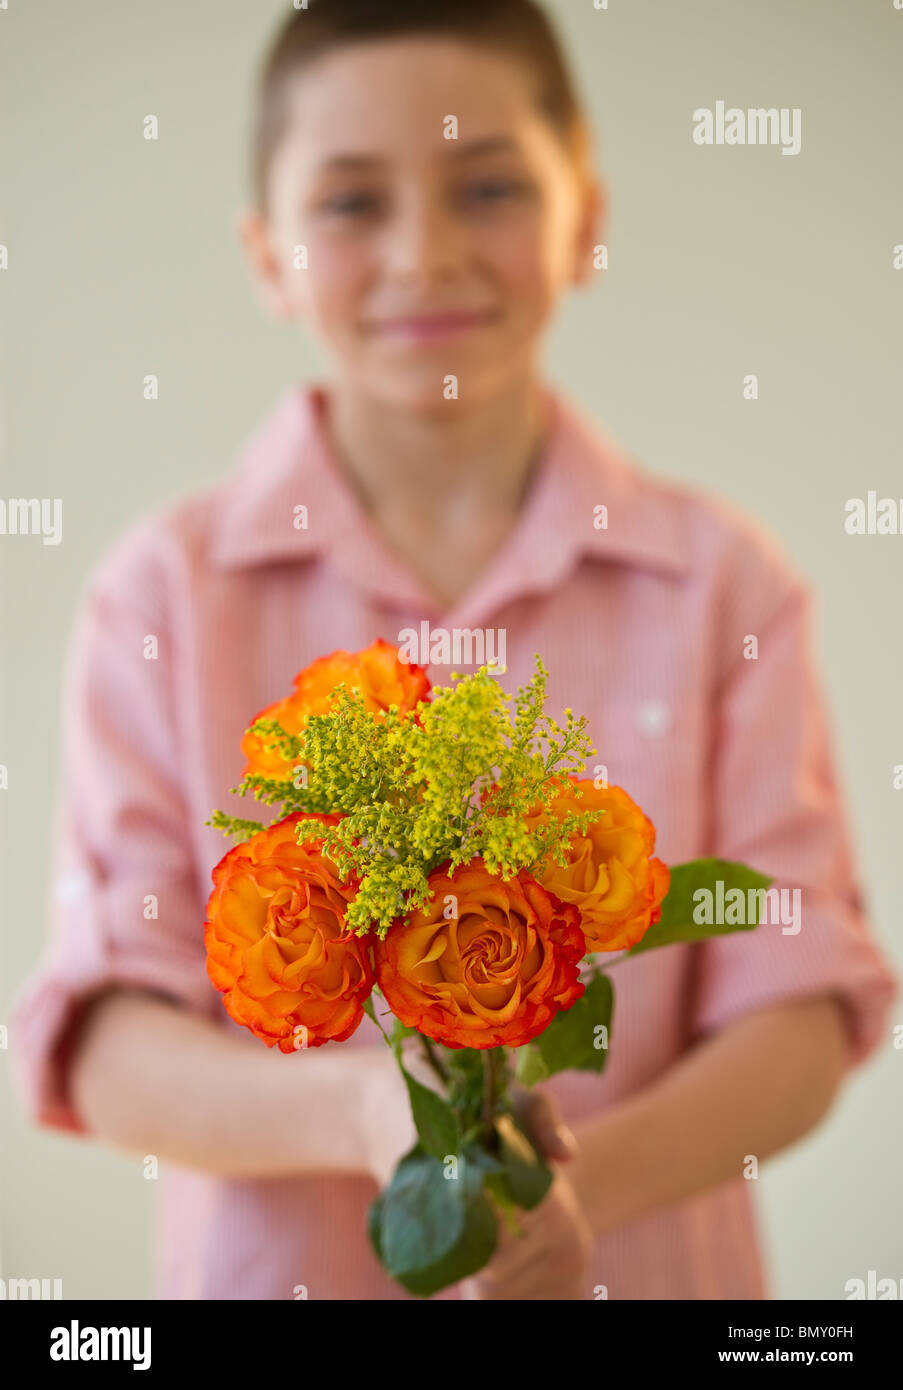 Young boy holding a bouquet of roses Stock Photo